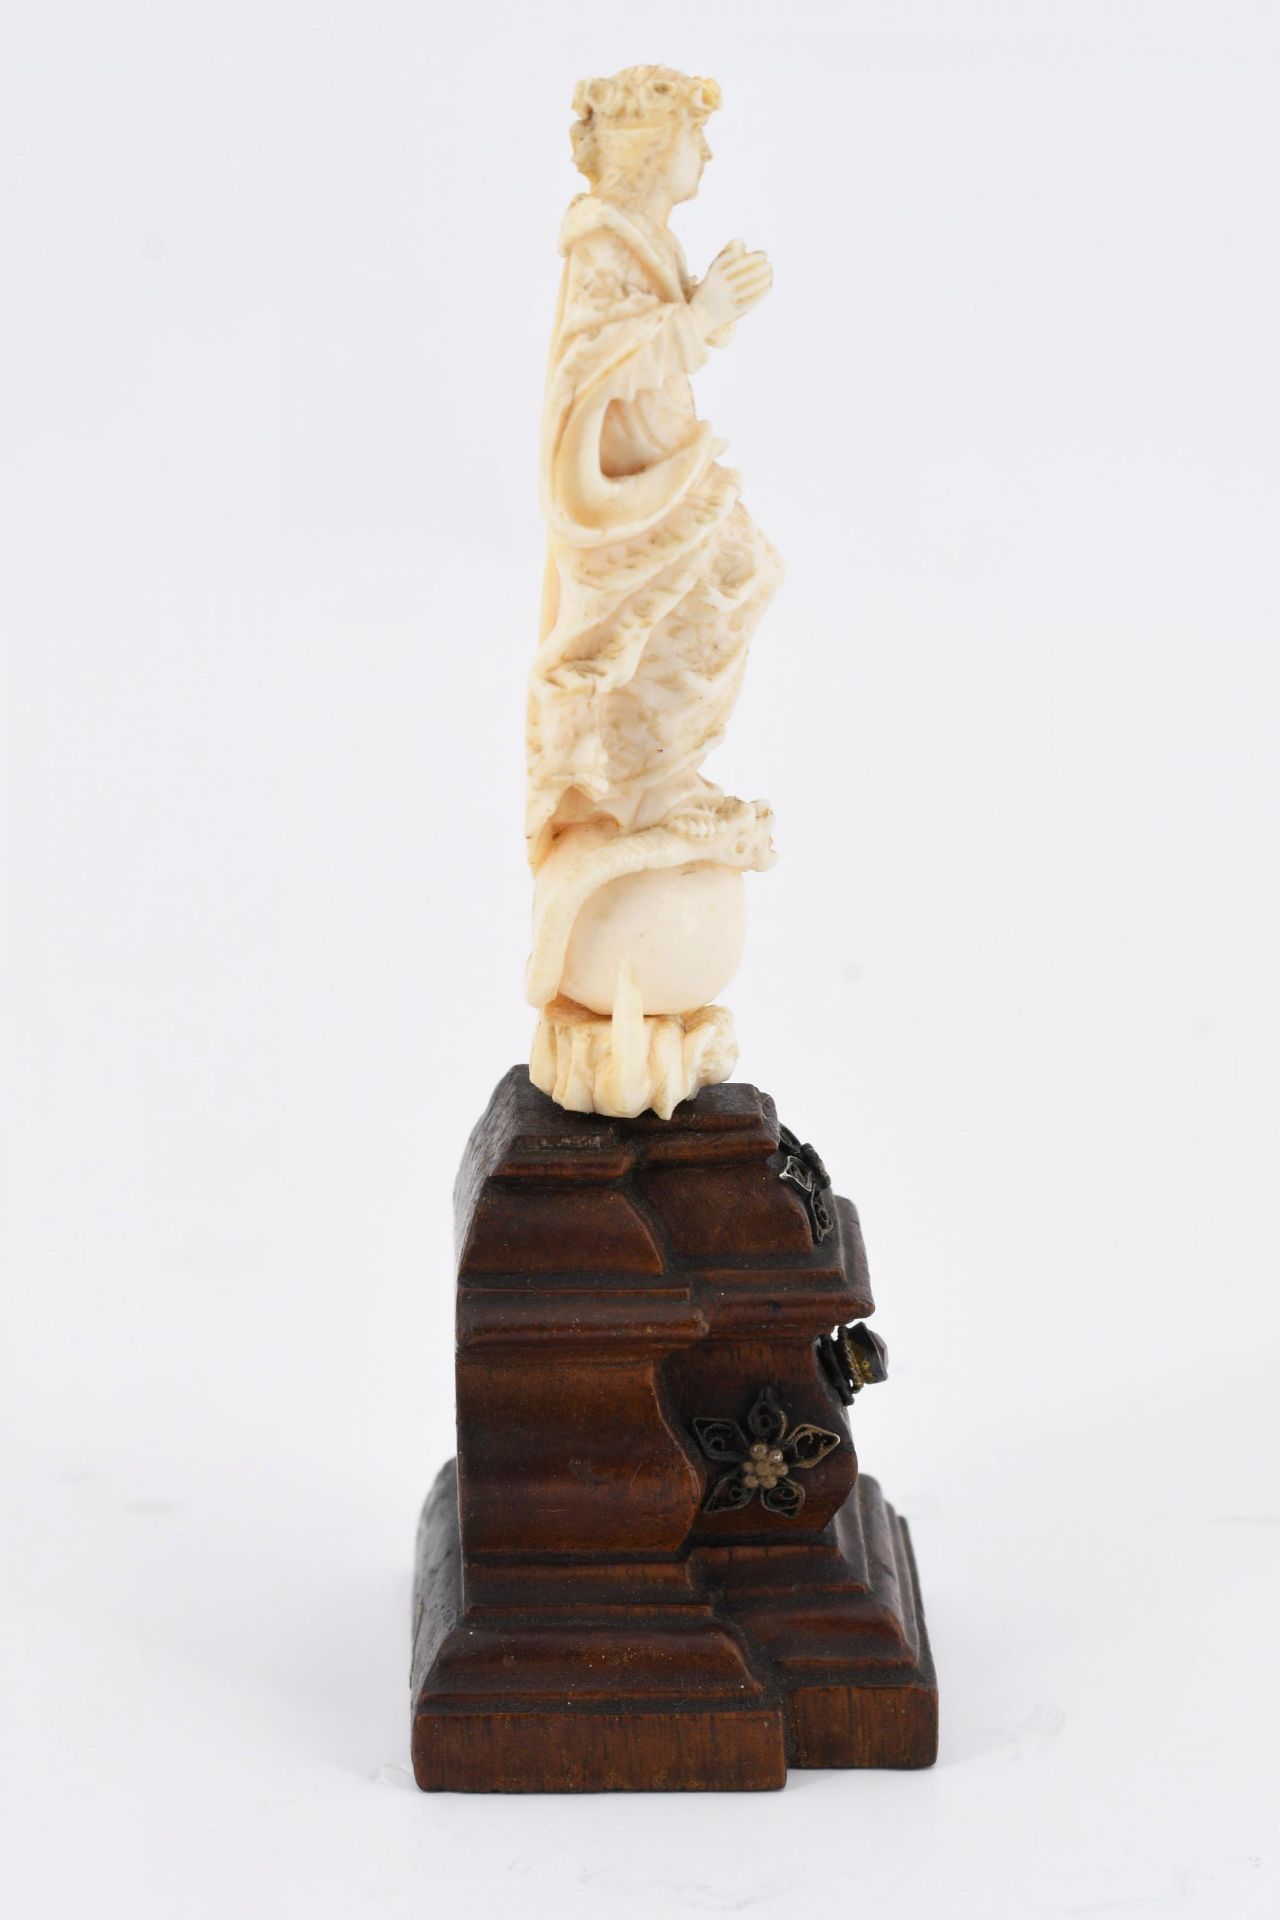 Ivory Madonna on a crescent moon - Image 5 of 6